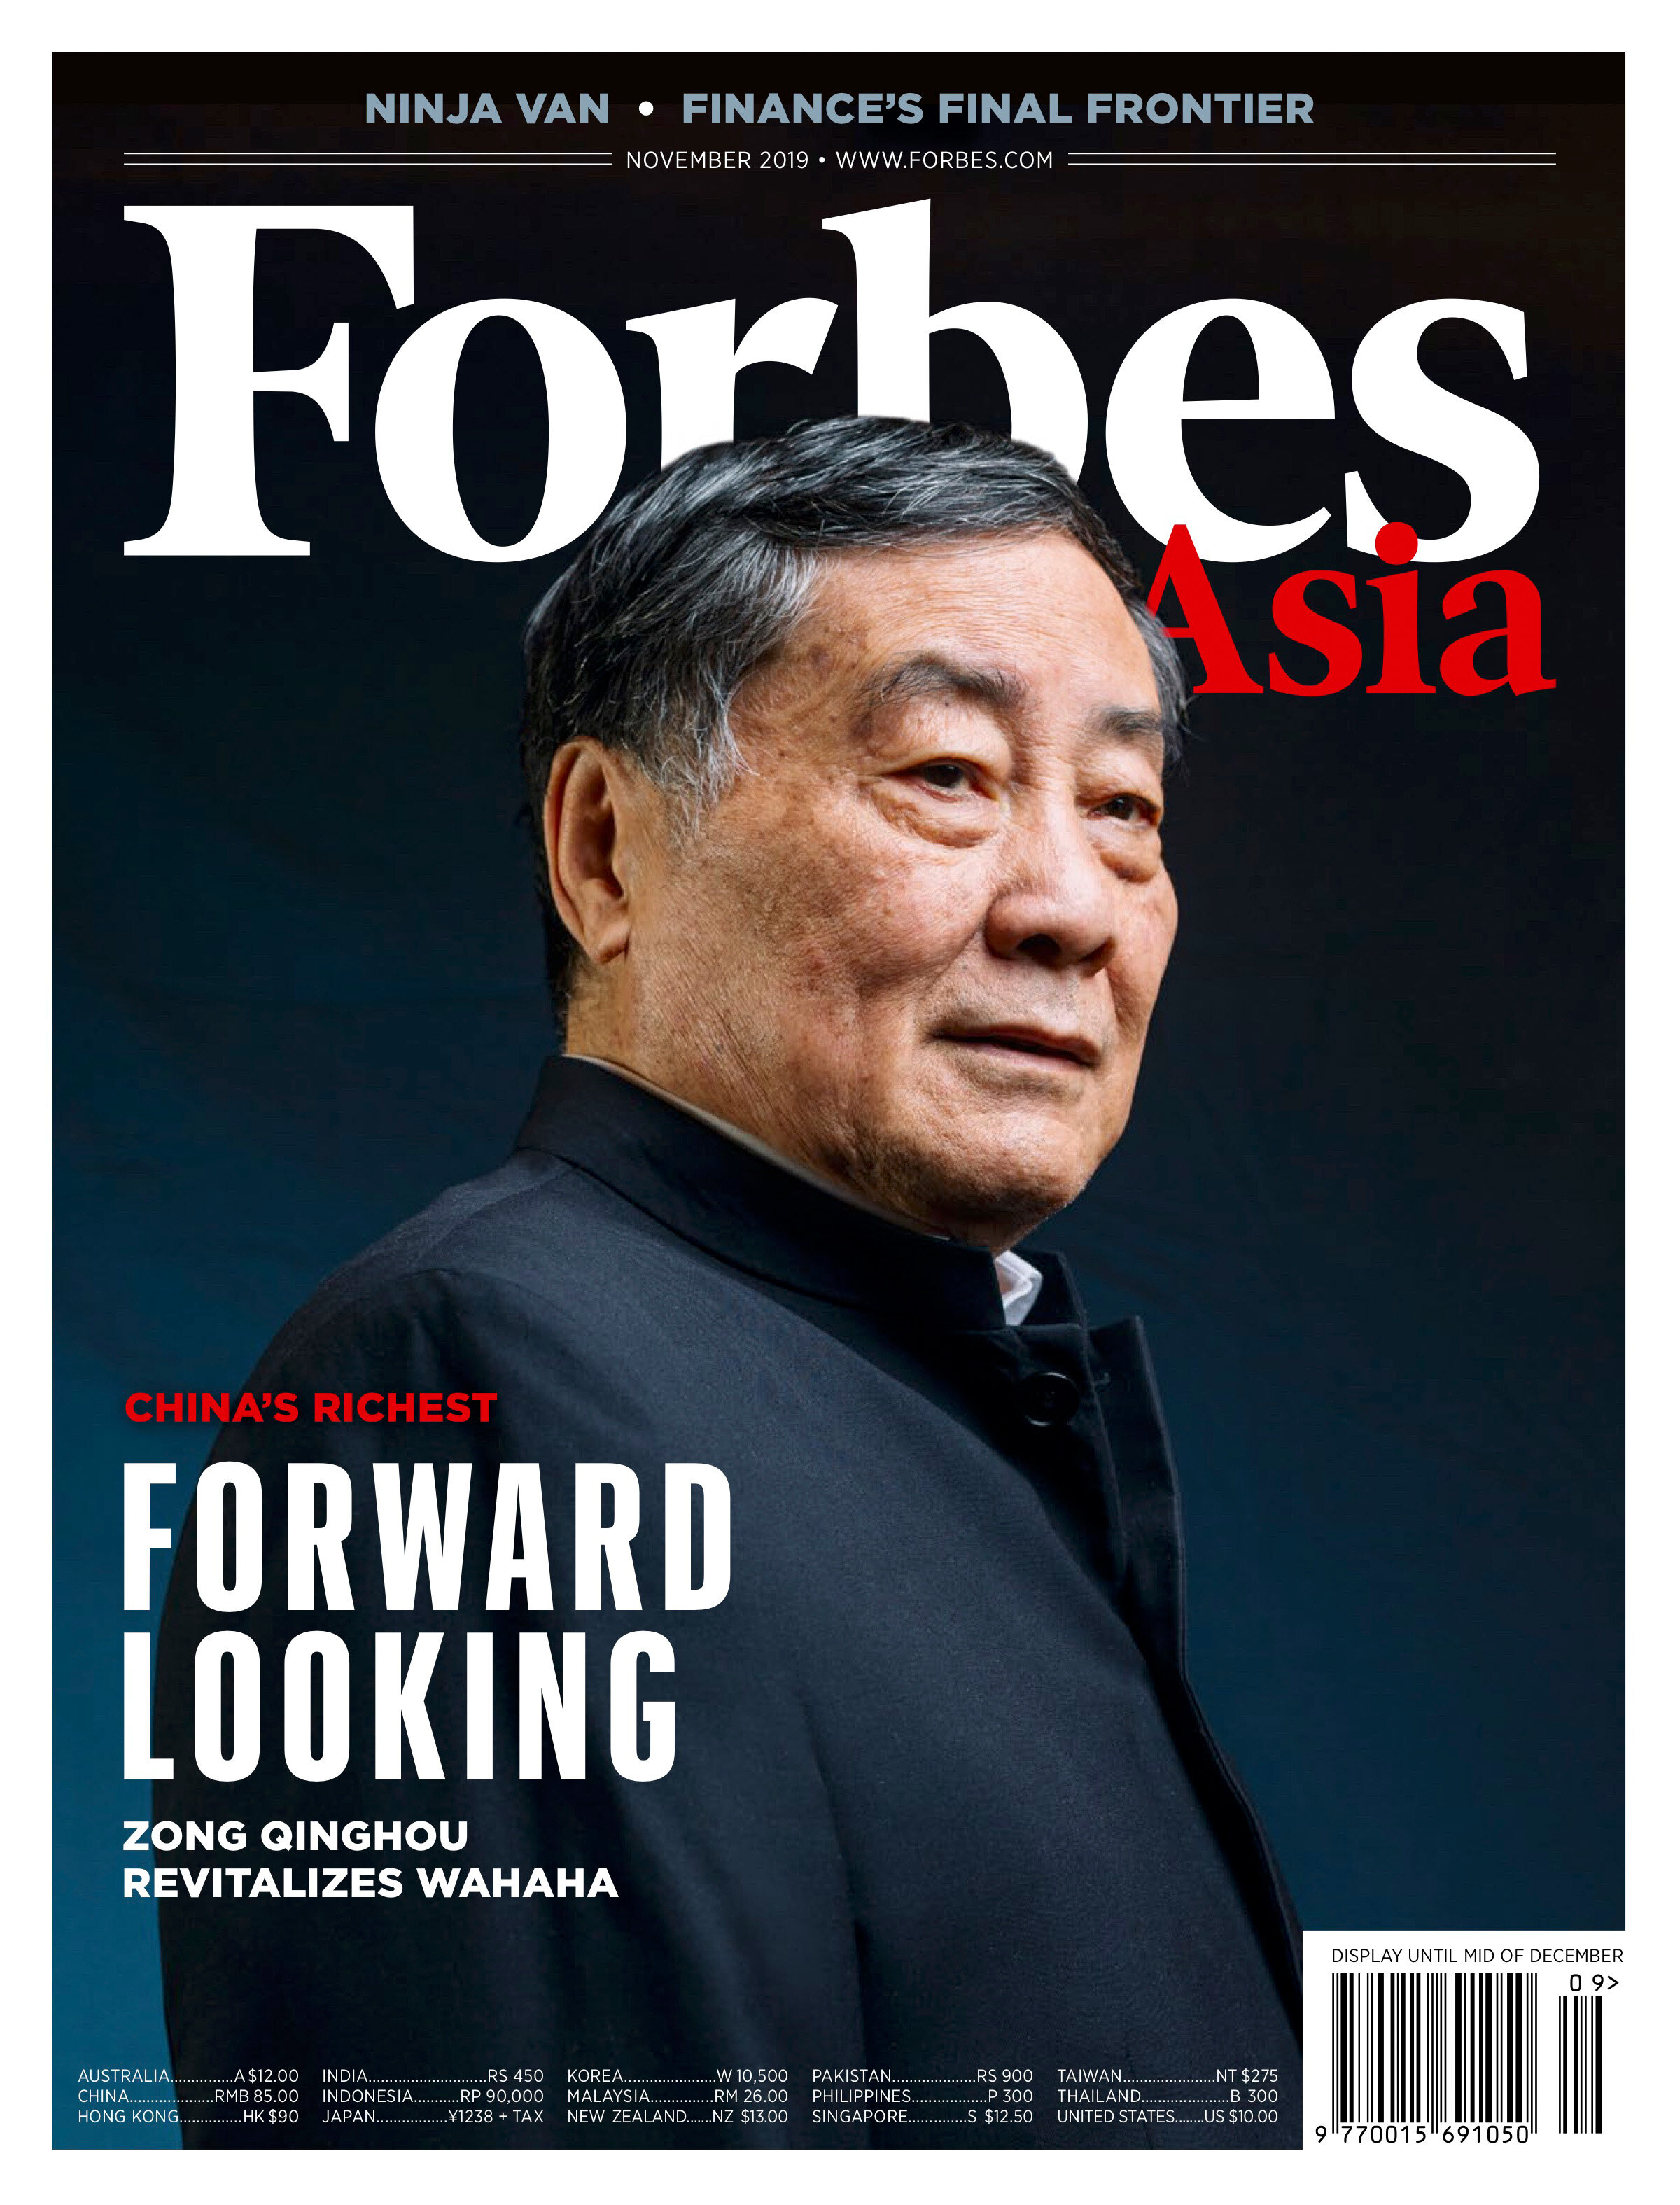  Portrait of Zong Qinghou, Chairman and CEO of Wahaha, for Forbes Asia November 2019 Cover 